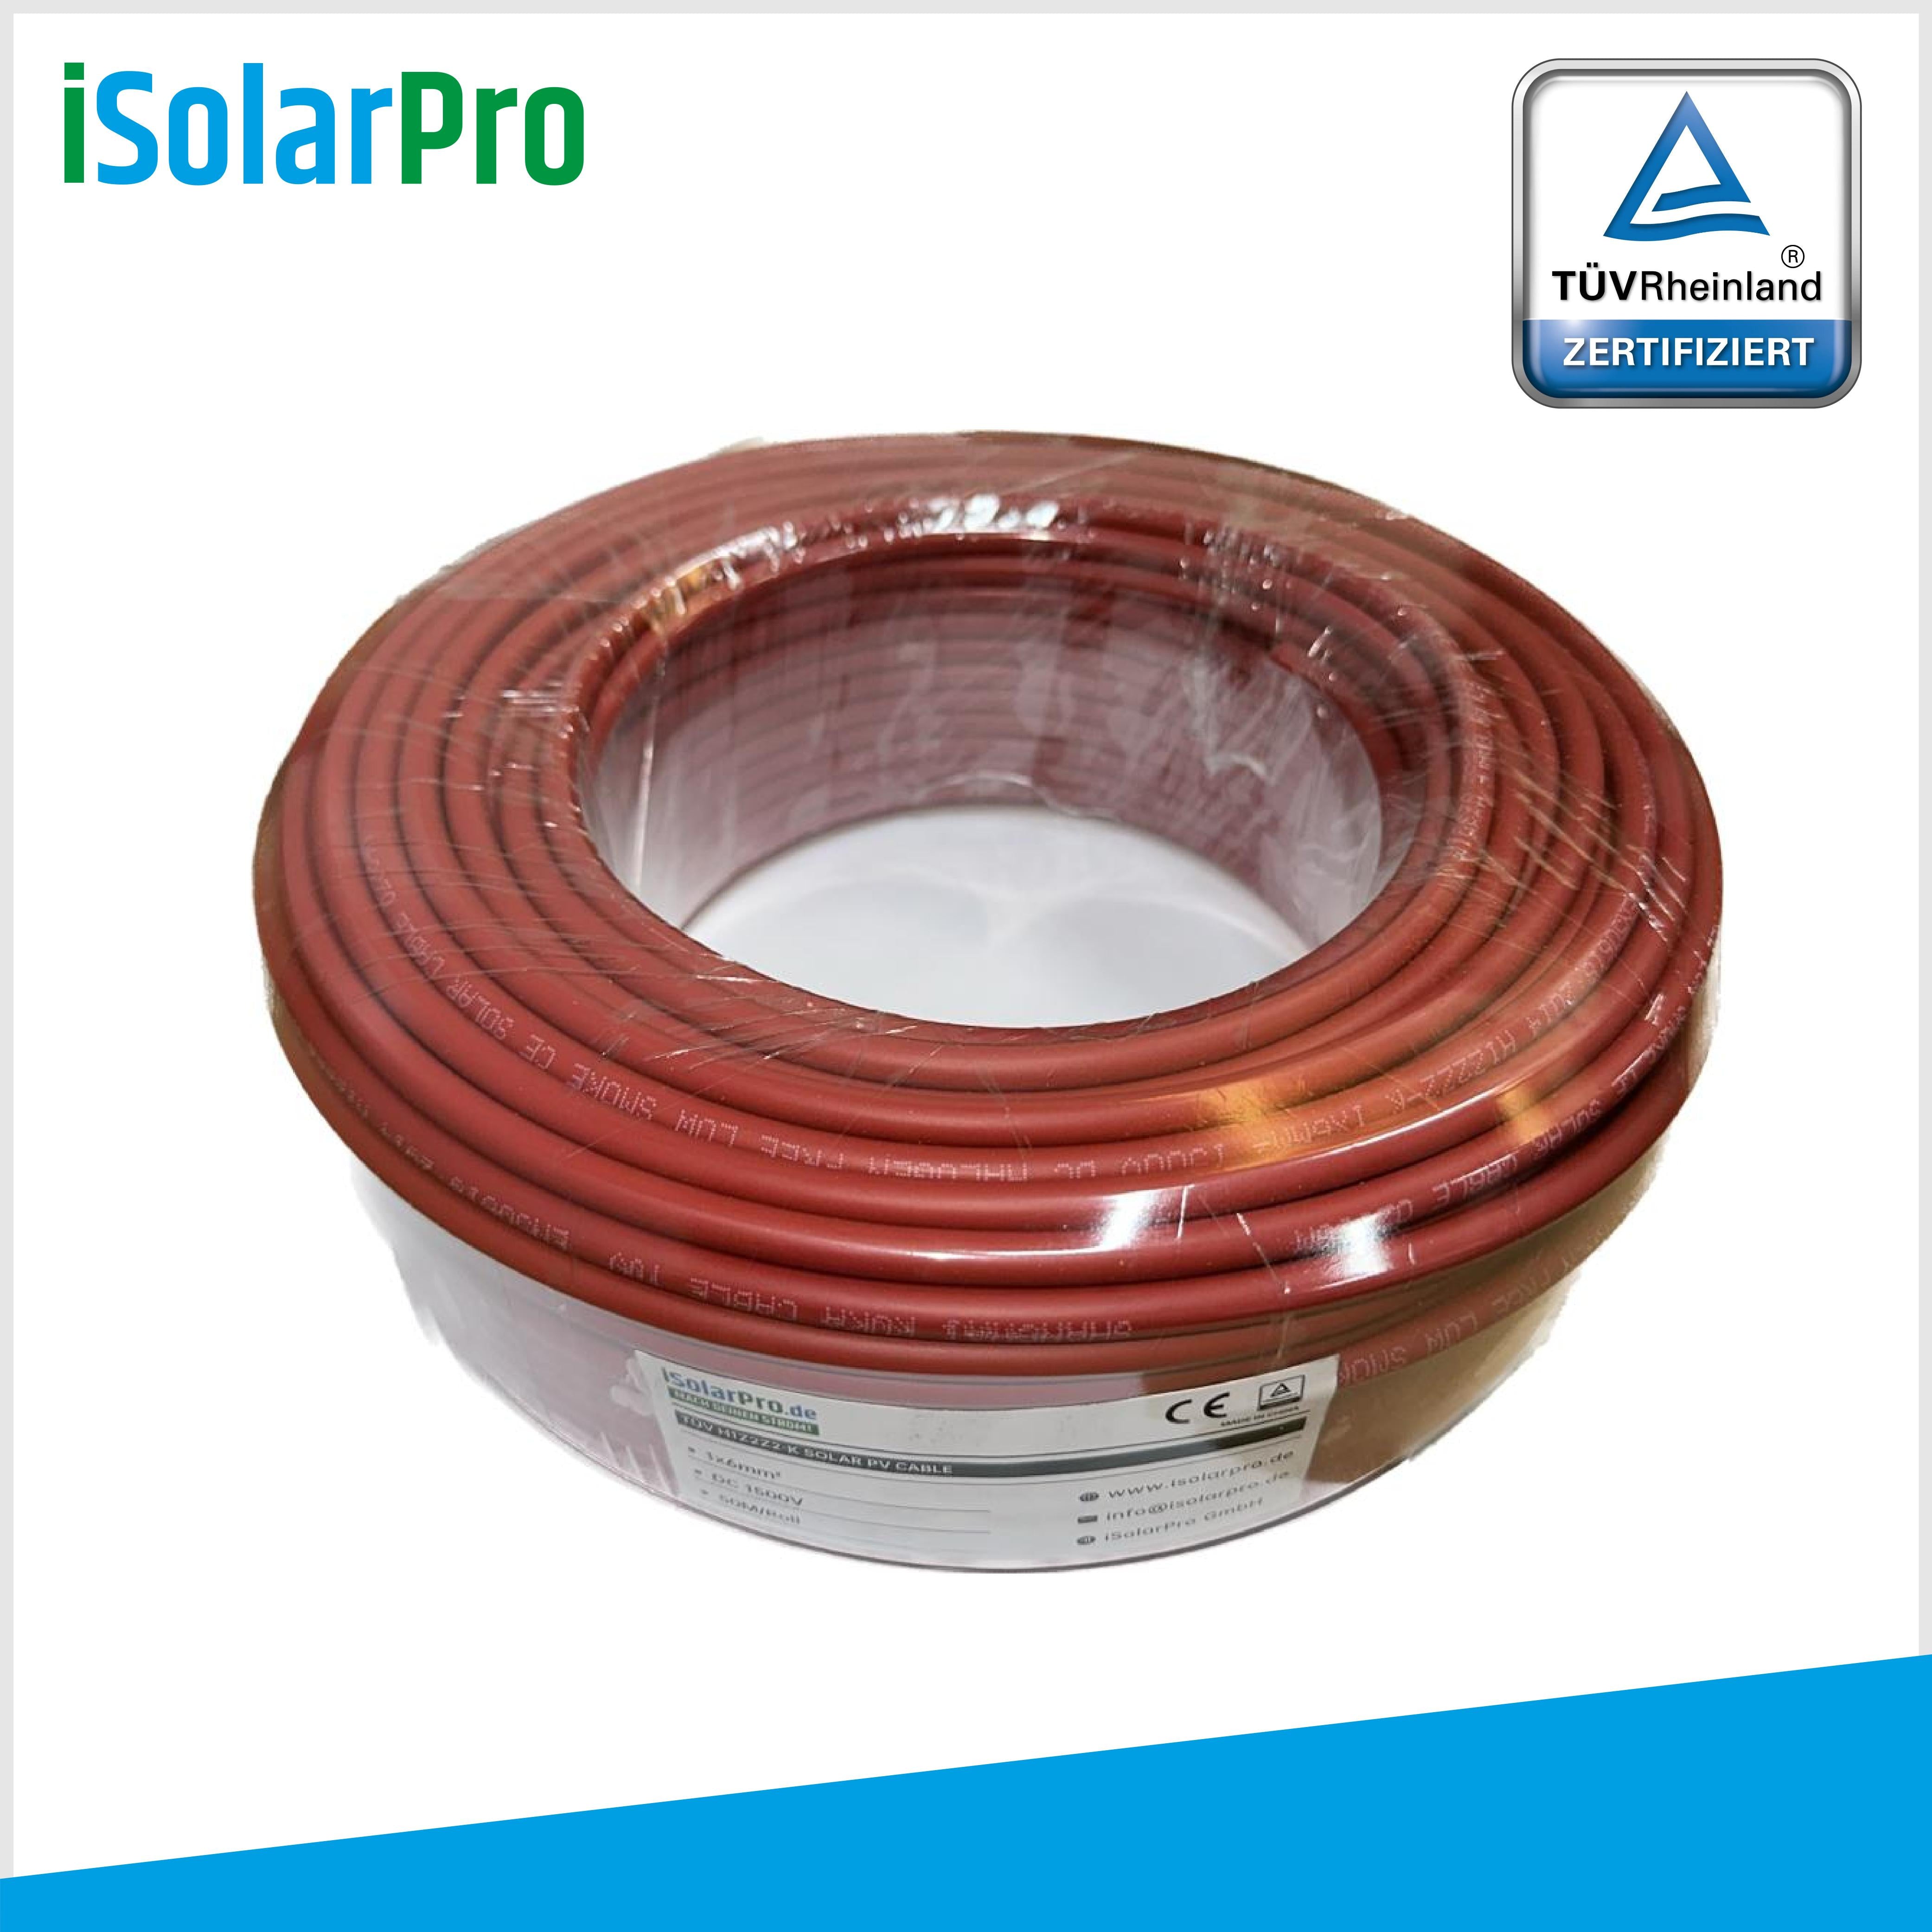 50m solar cable 6 mm² photovoltaic cable for PV systems red 